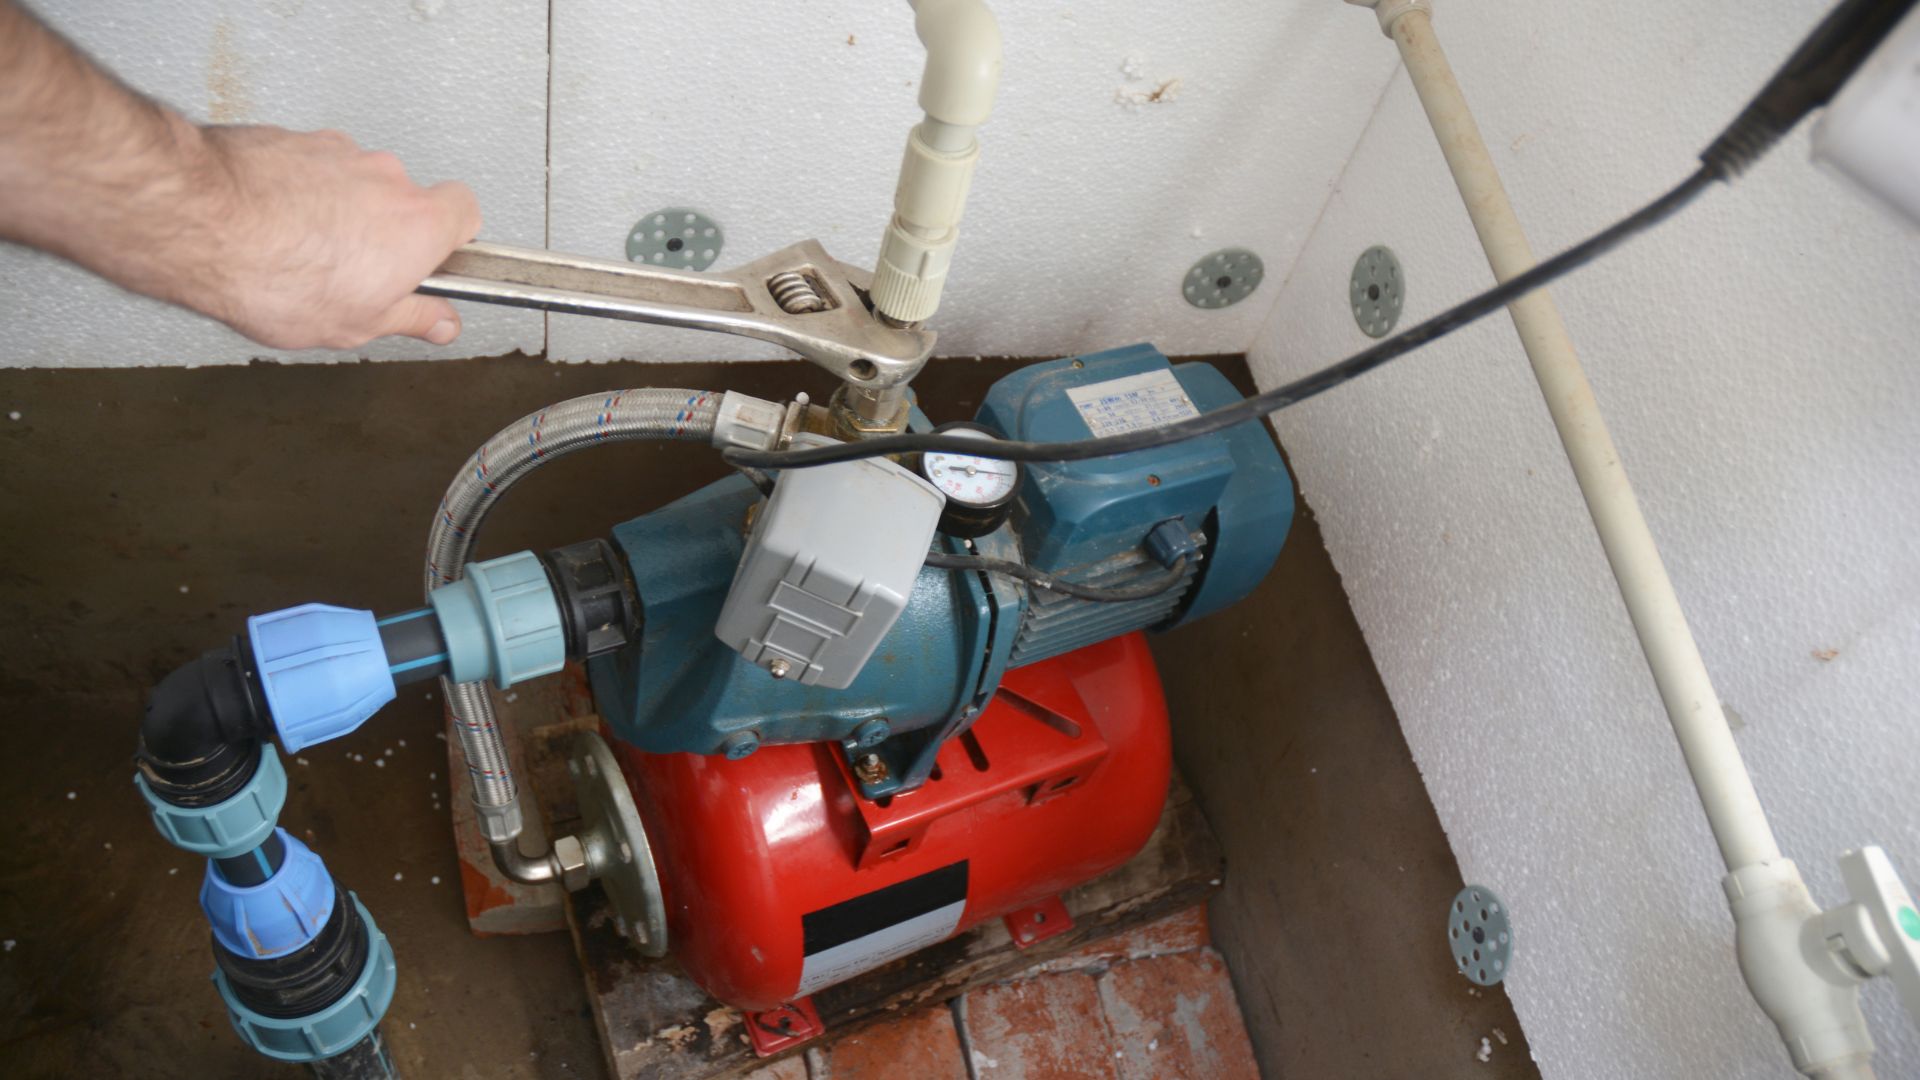 Lowers Repair Costs with Expert Plumbers